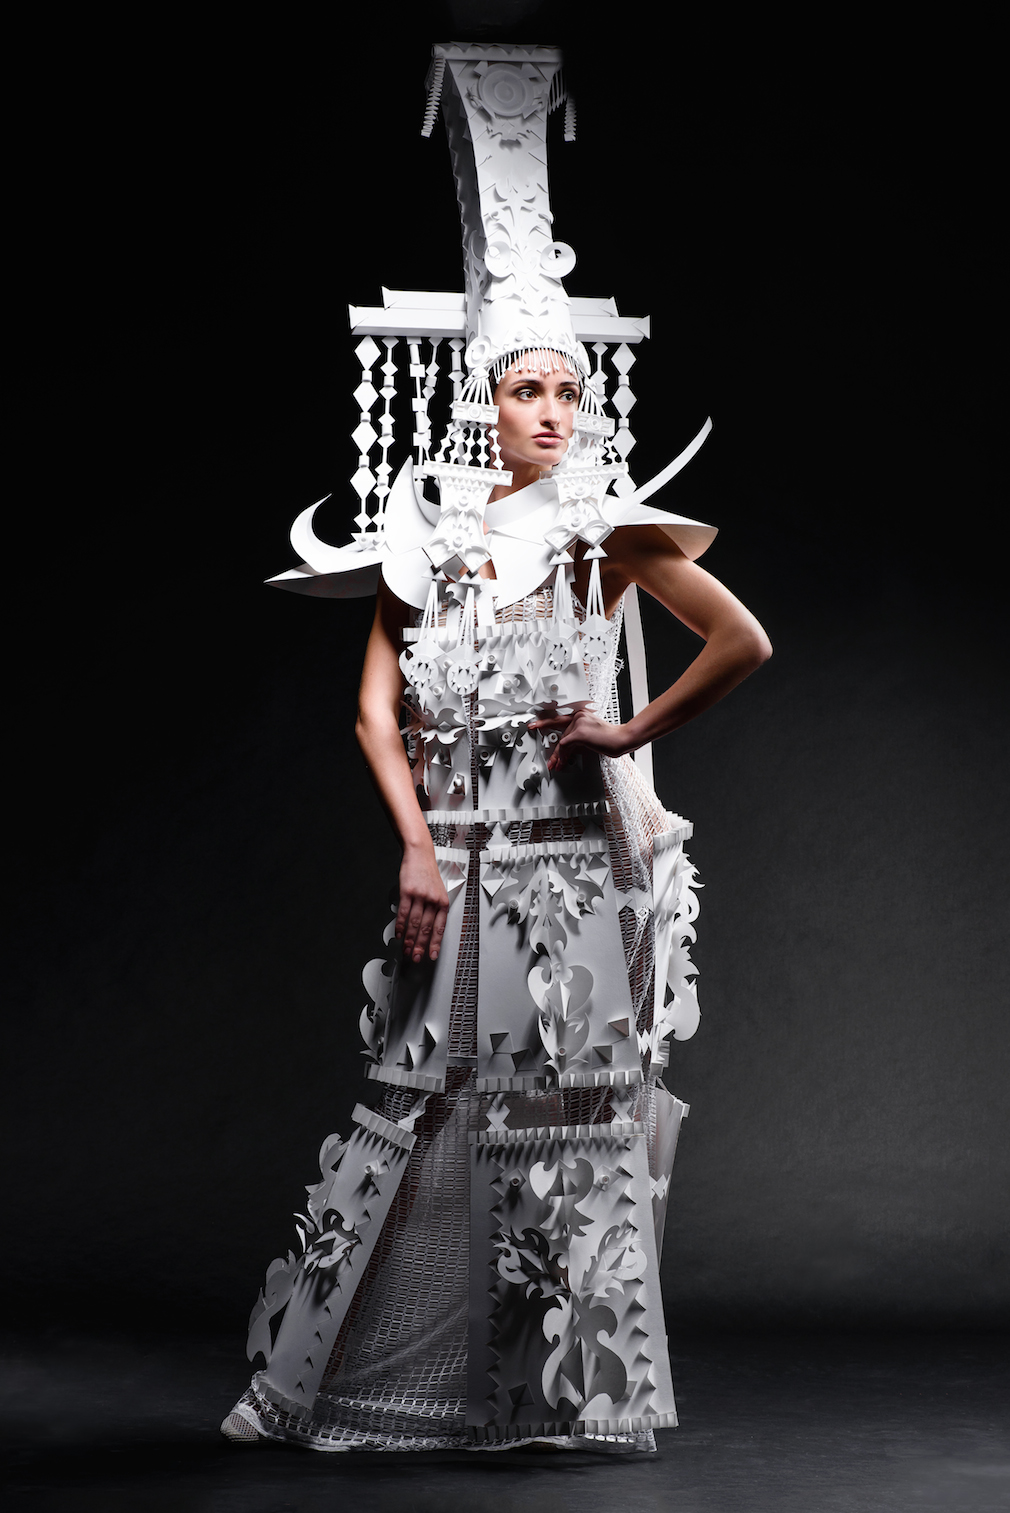 These Mongolian Wedding Costumes Are Made Entirely of Paper | HuffPost